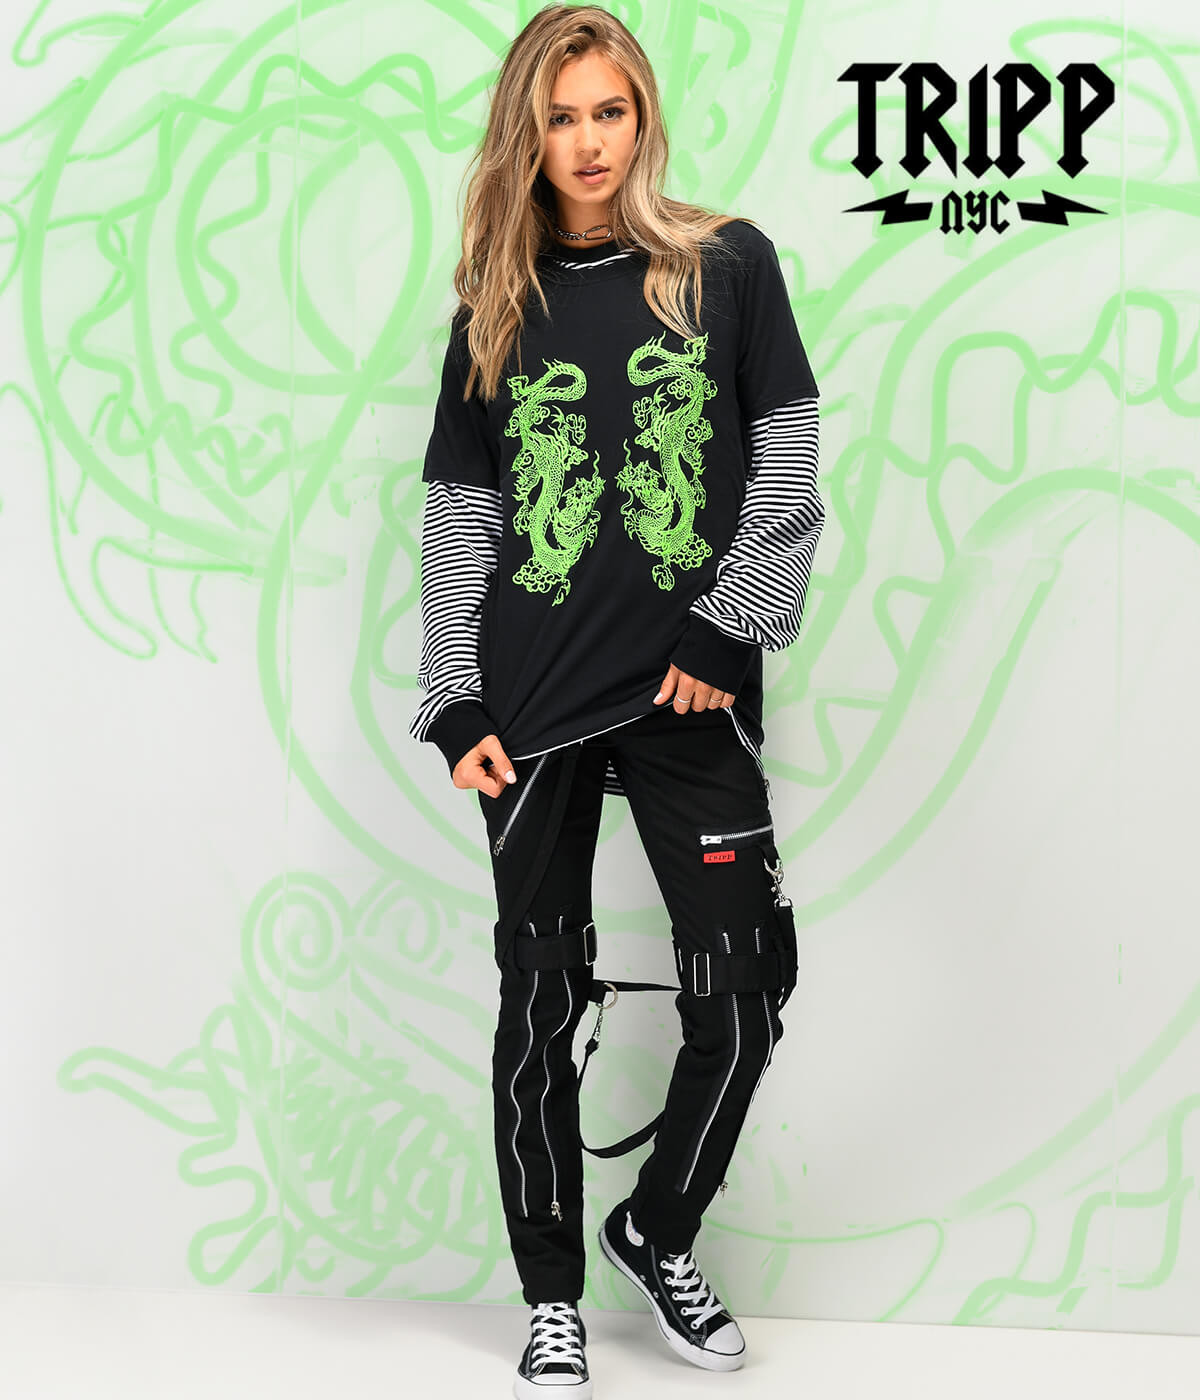 WOMEN'S NEW ARRIVAL PANTS FROM TRIPP NYC AND MORE - SHOP WOMEN'S PANTS